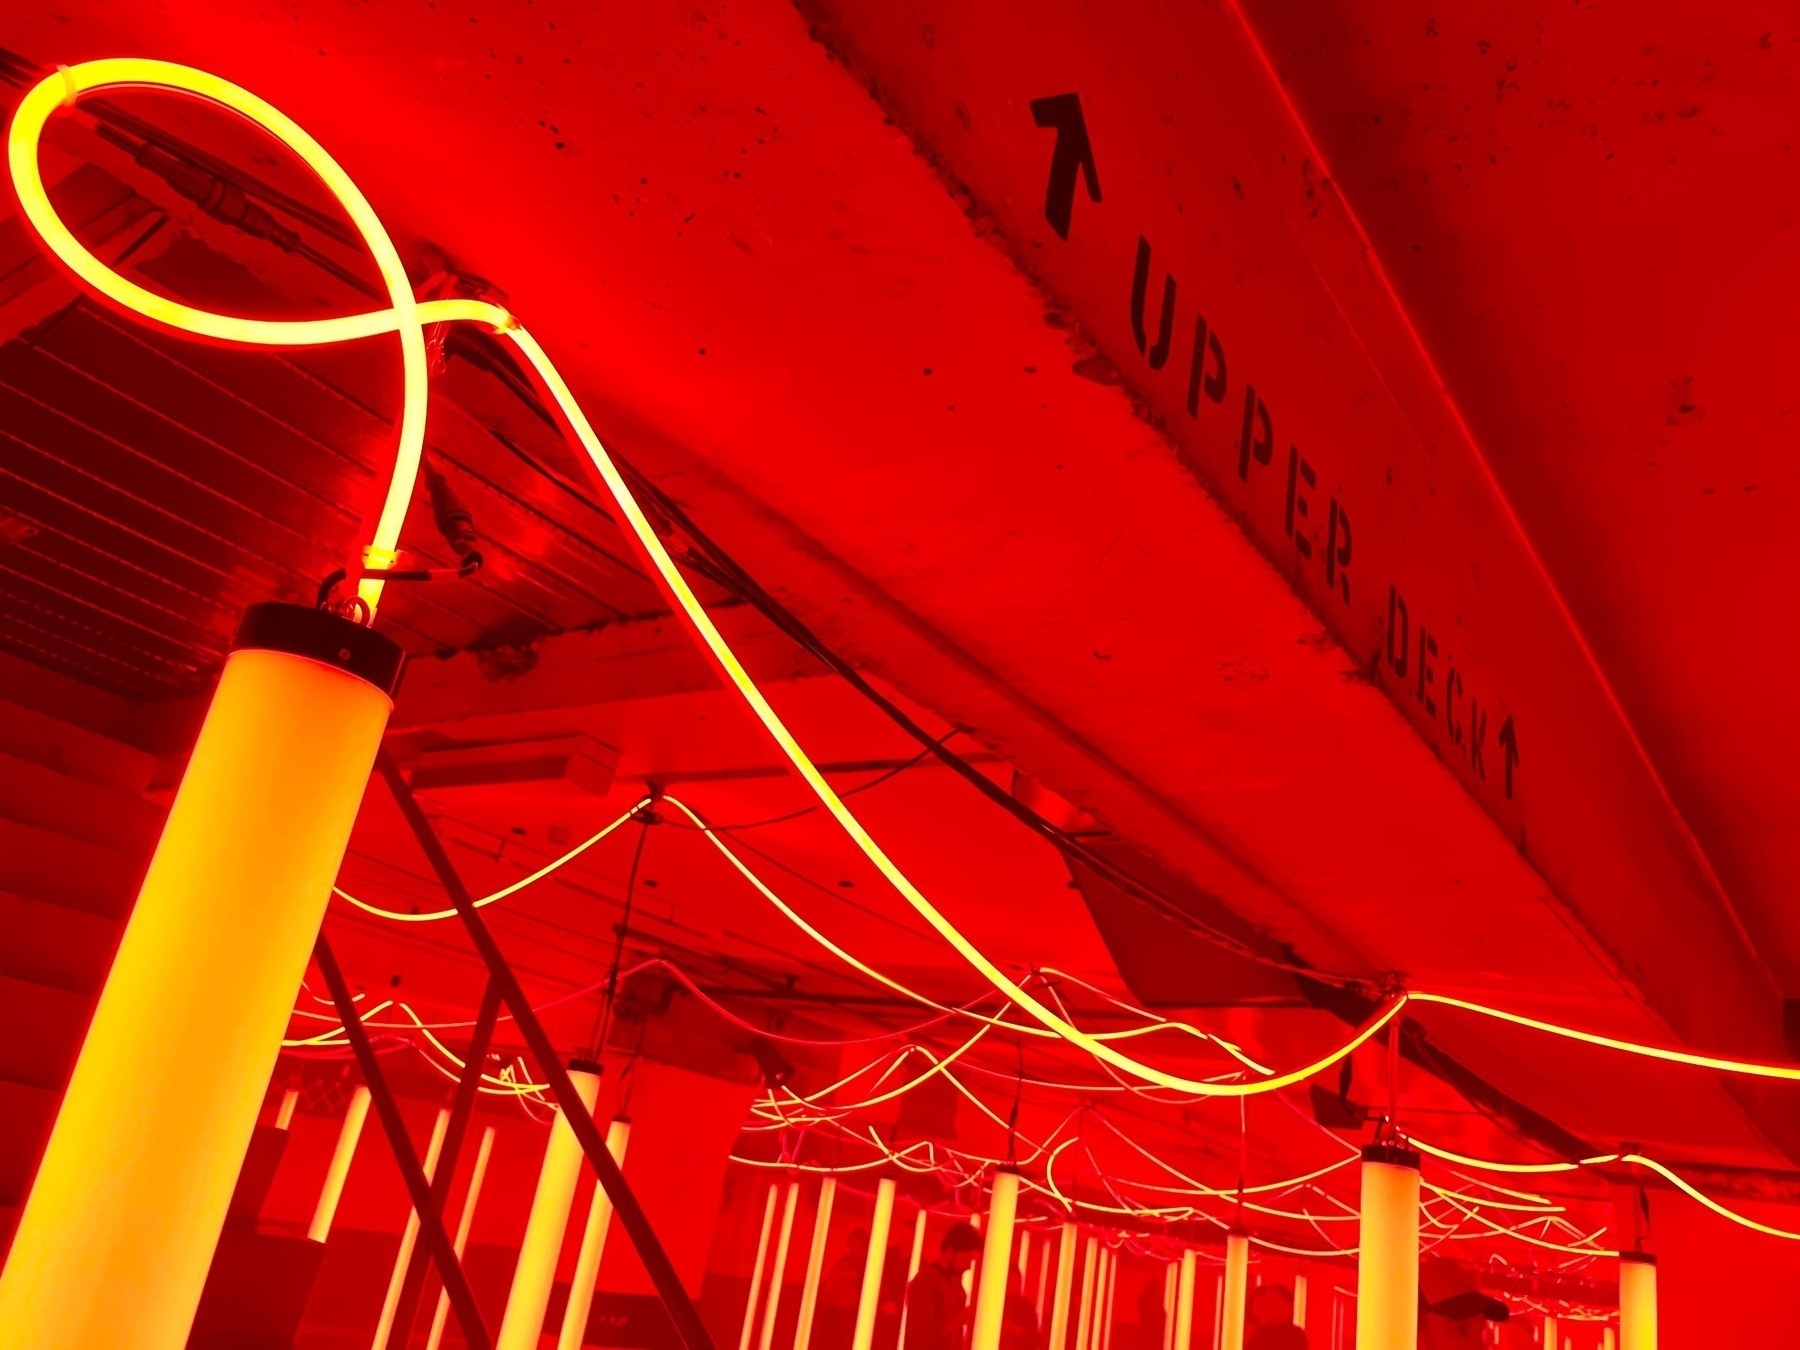 Constriction stage: tubes of red light